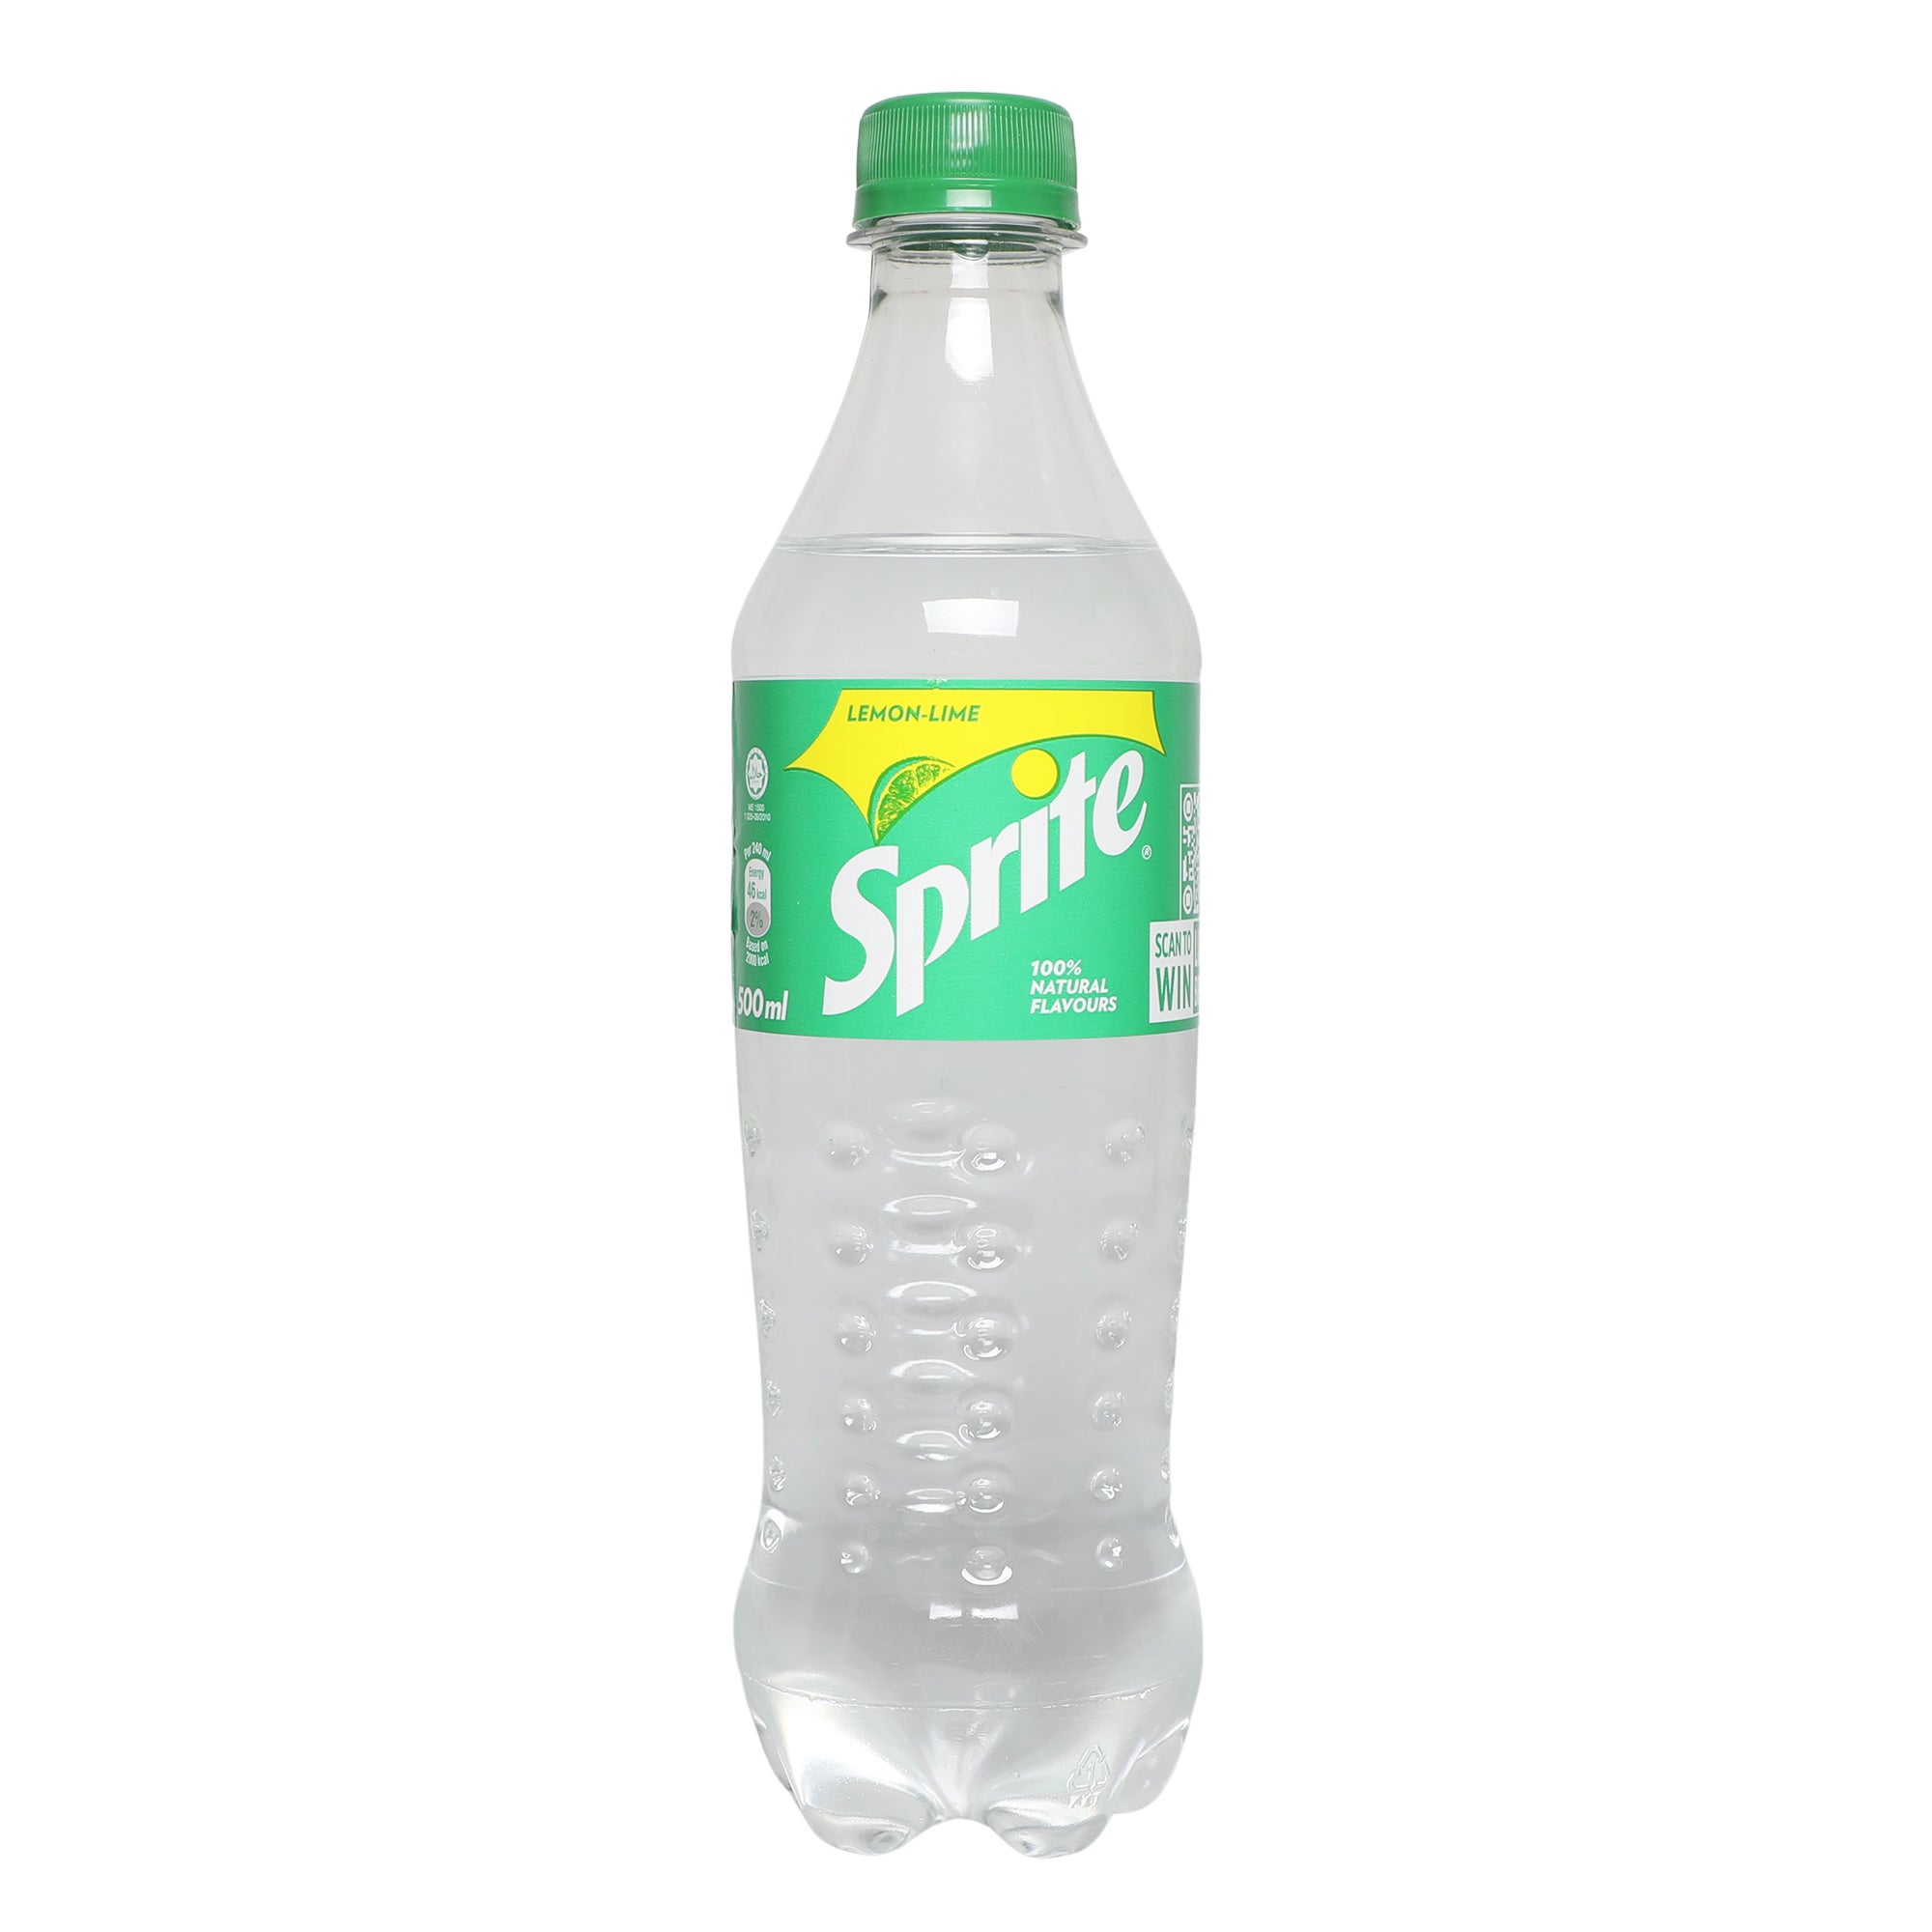 Sprite Drink: Most Up-to-Date Encyclopedia, News & Reviews